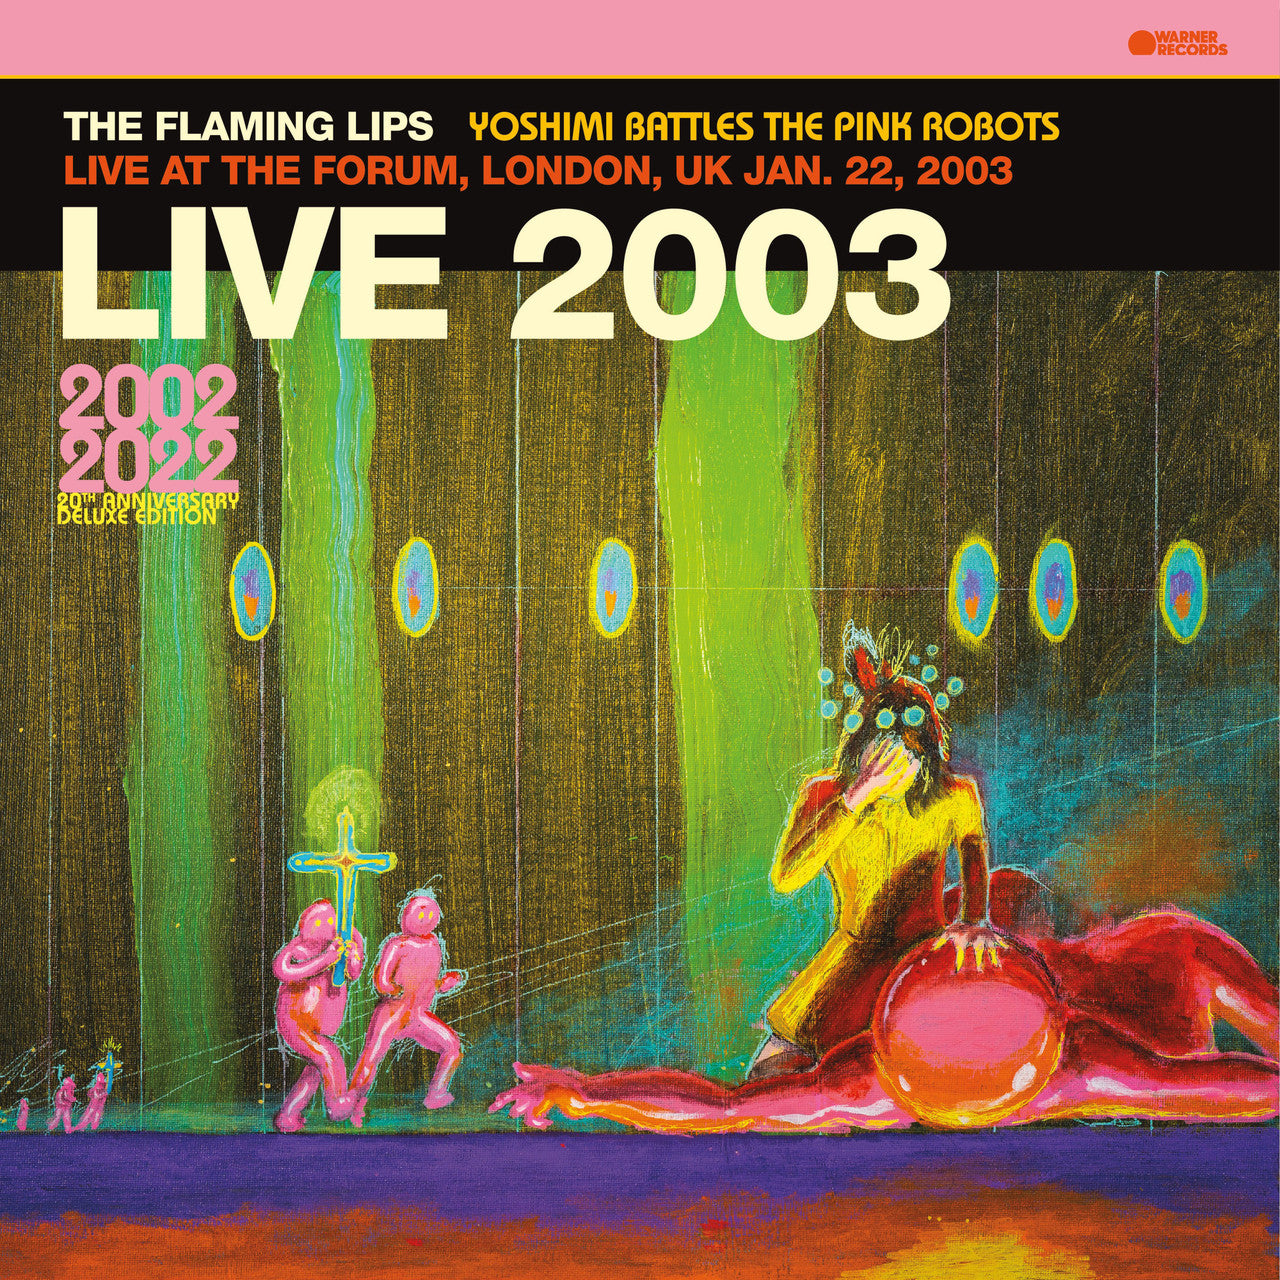 Order The Flaming Lips - The Flaming Lips Live at the Forum, London, UK Jan. 22, 2003 (2xLP Pink Vinyl)